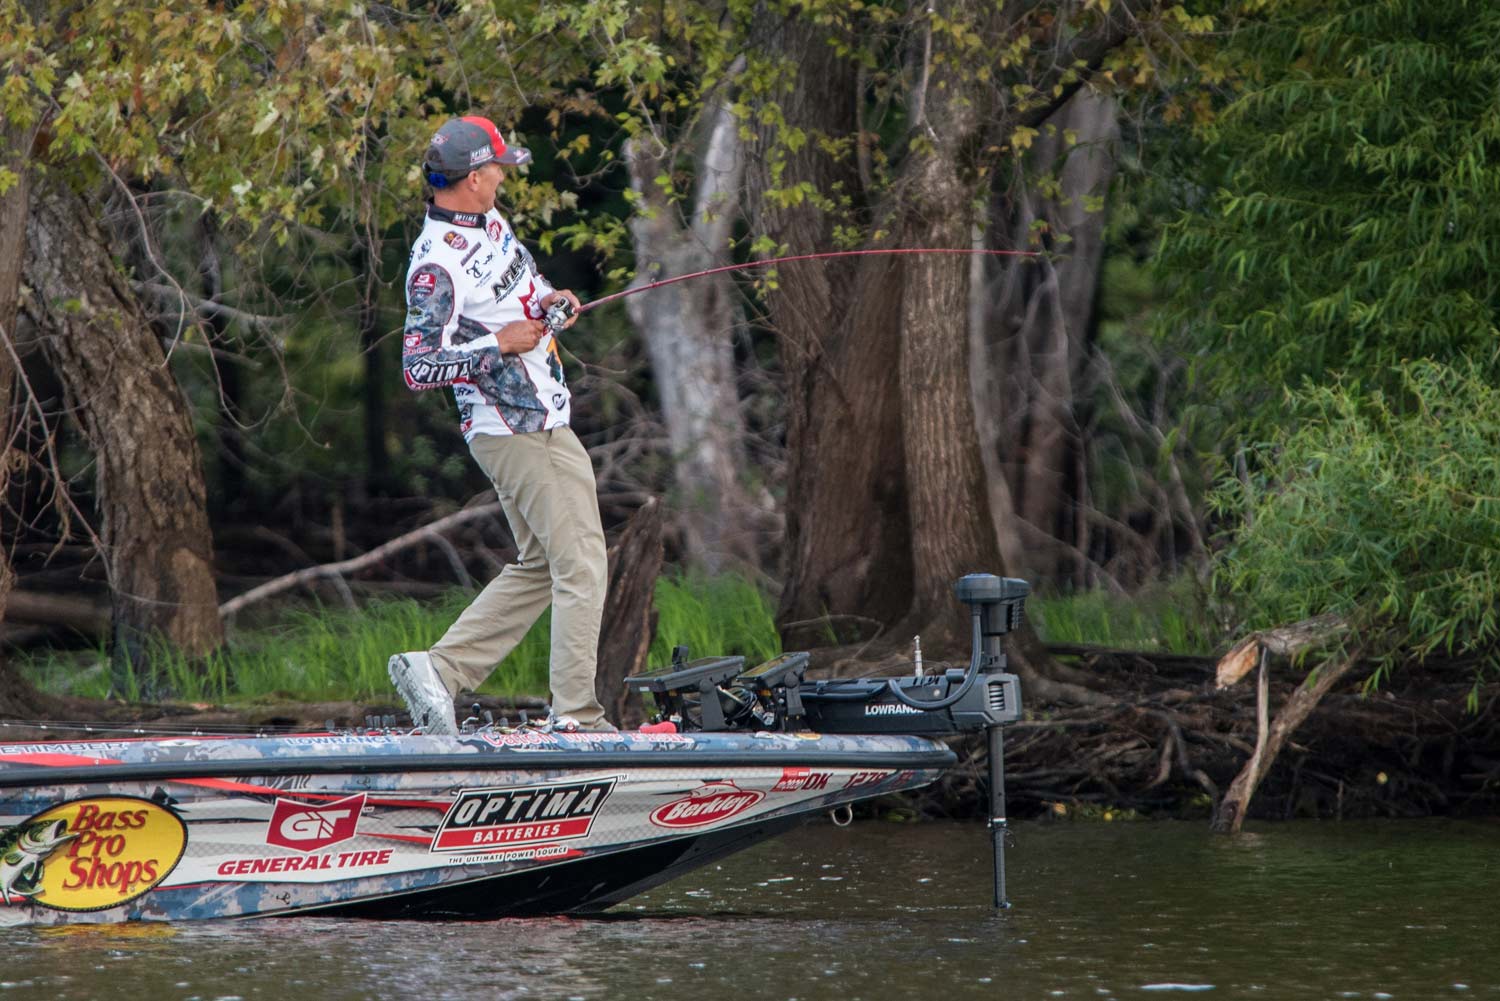 Edwin Evers fishing off the front of a Bass Pro sport fishing boat.